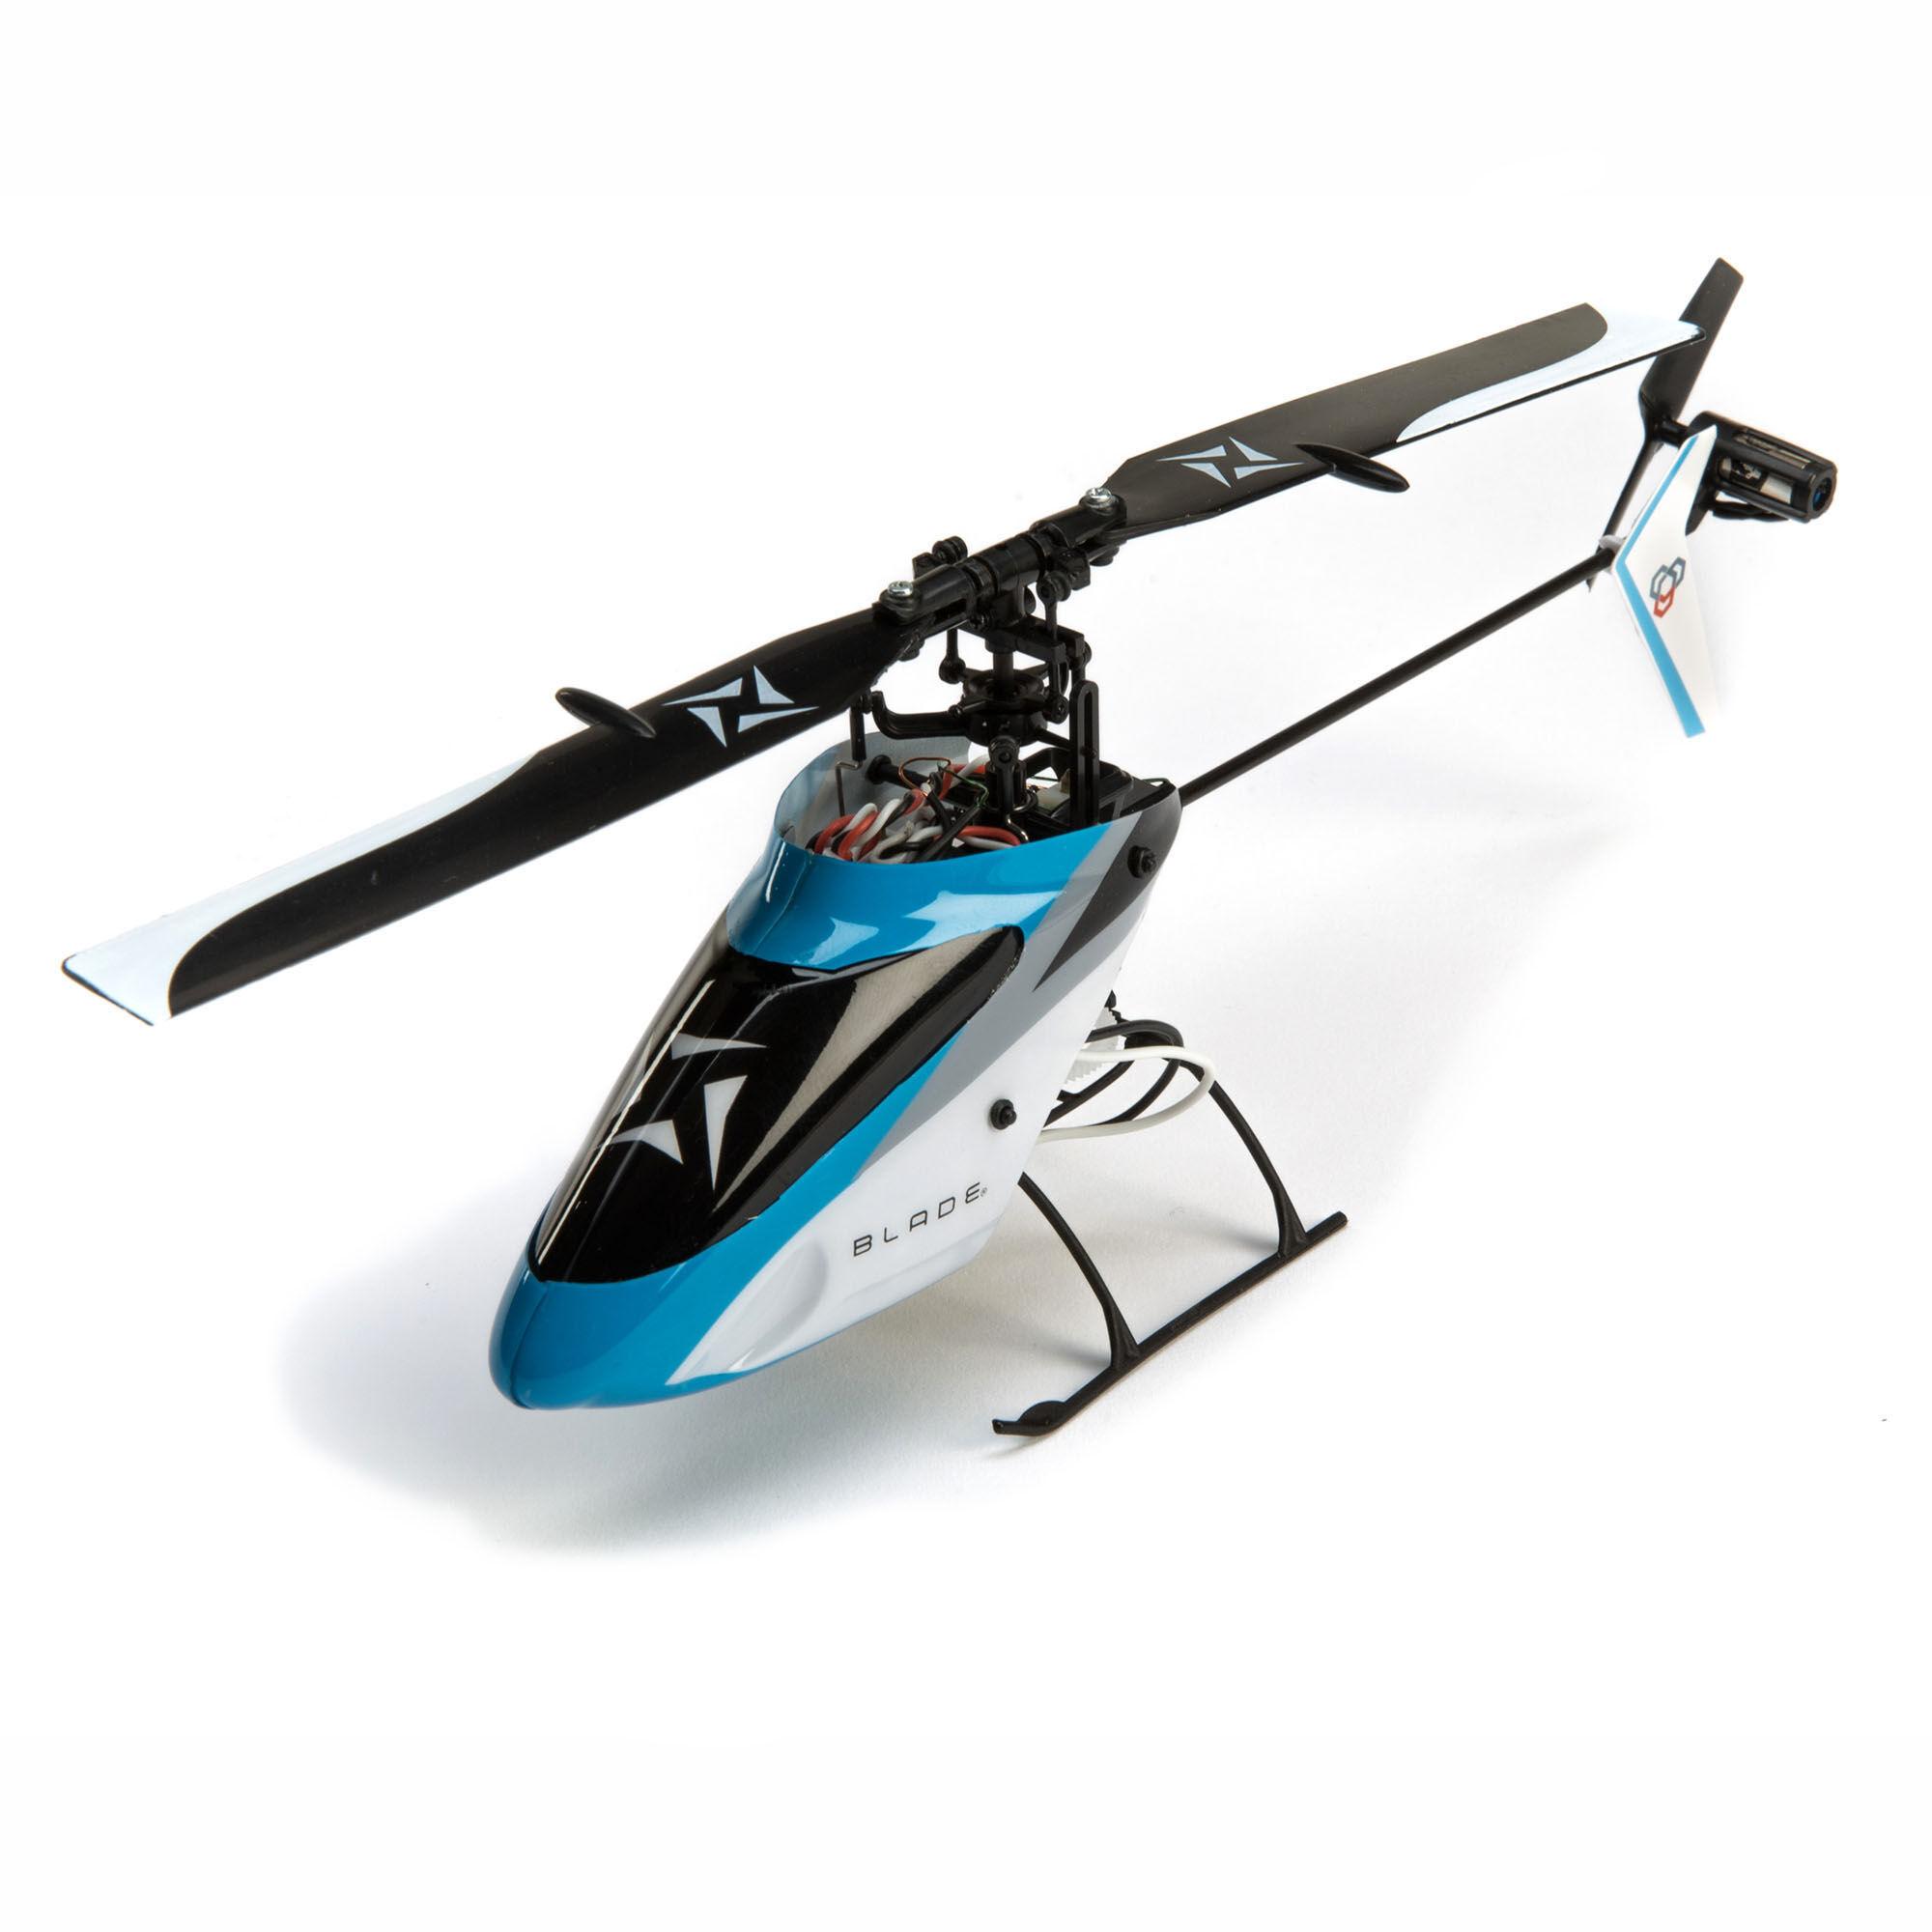 Best Rc Heli Transmitter: Key Features to Consider for Best RC Heli Transmitter